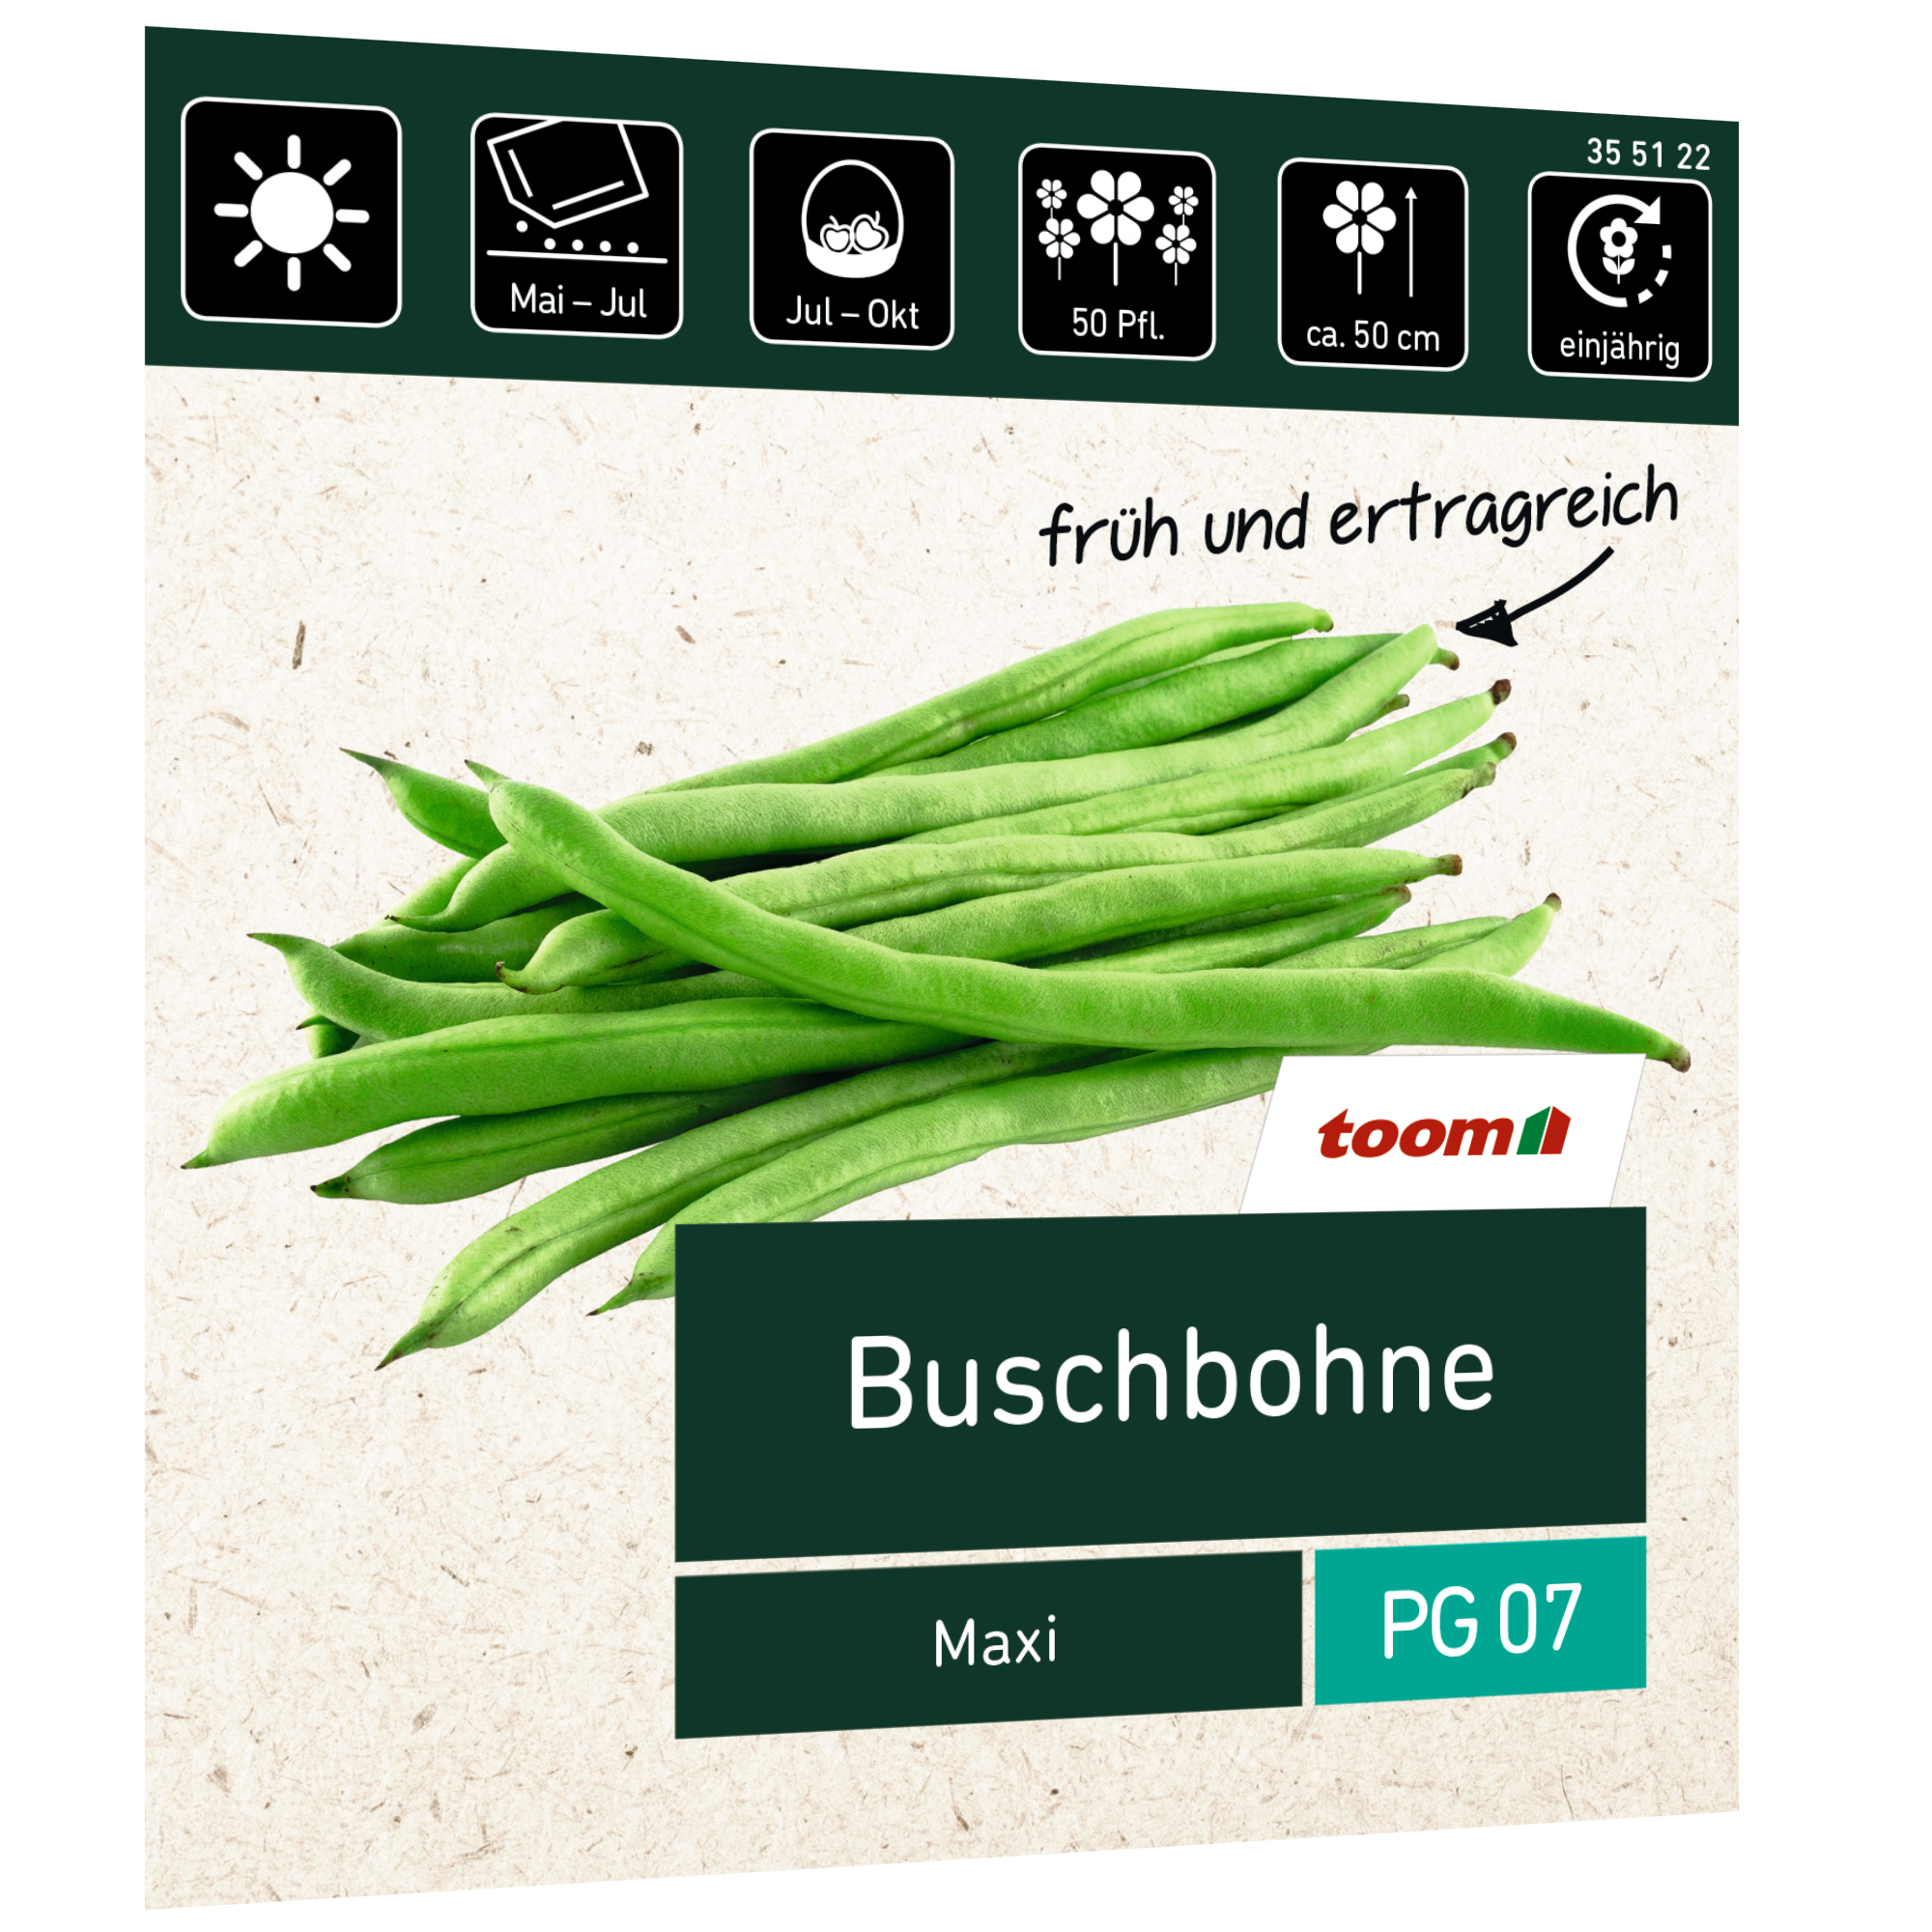 Buschbohne 'Maxi' + product picture